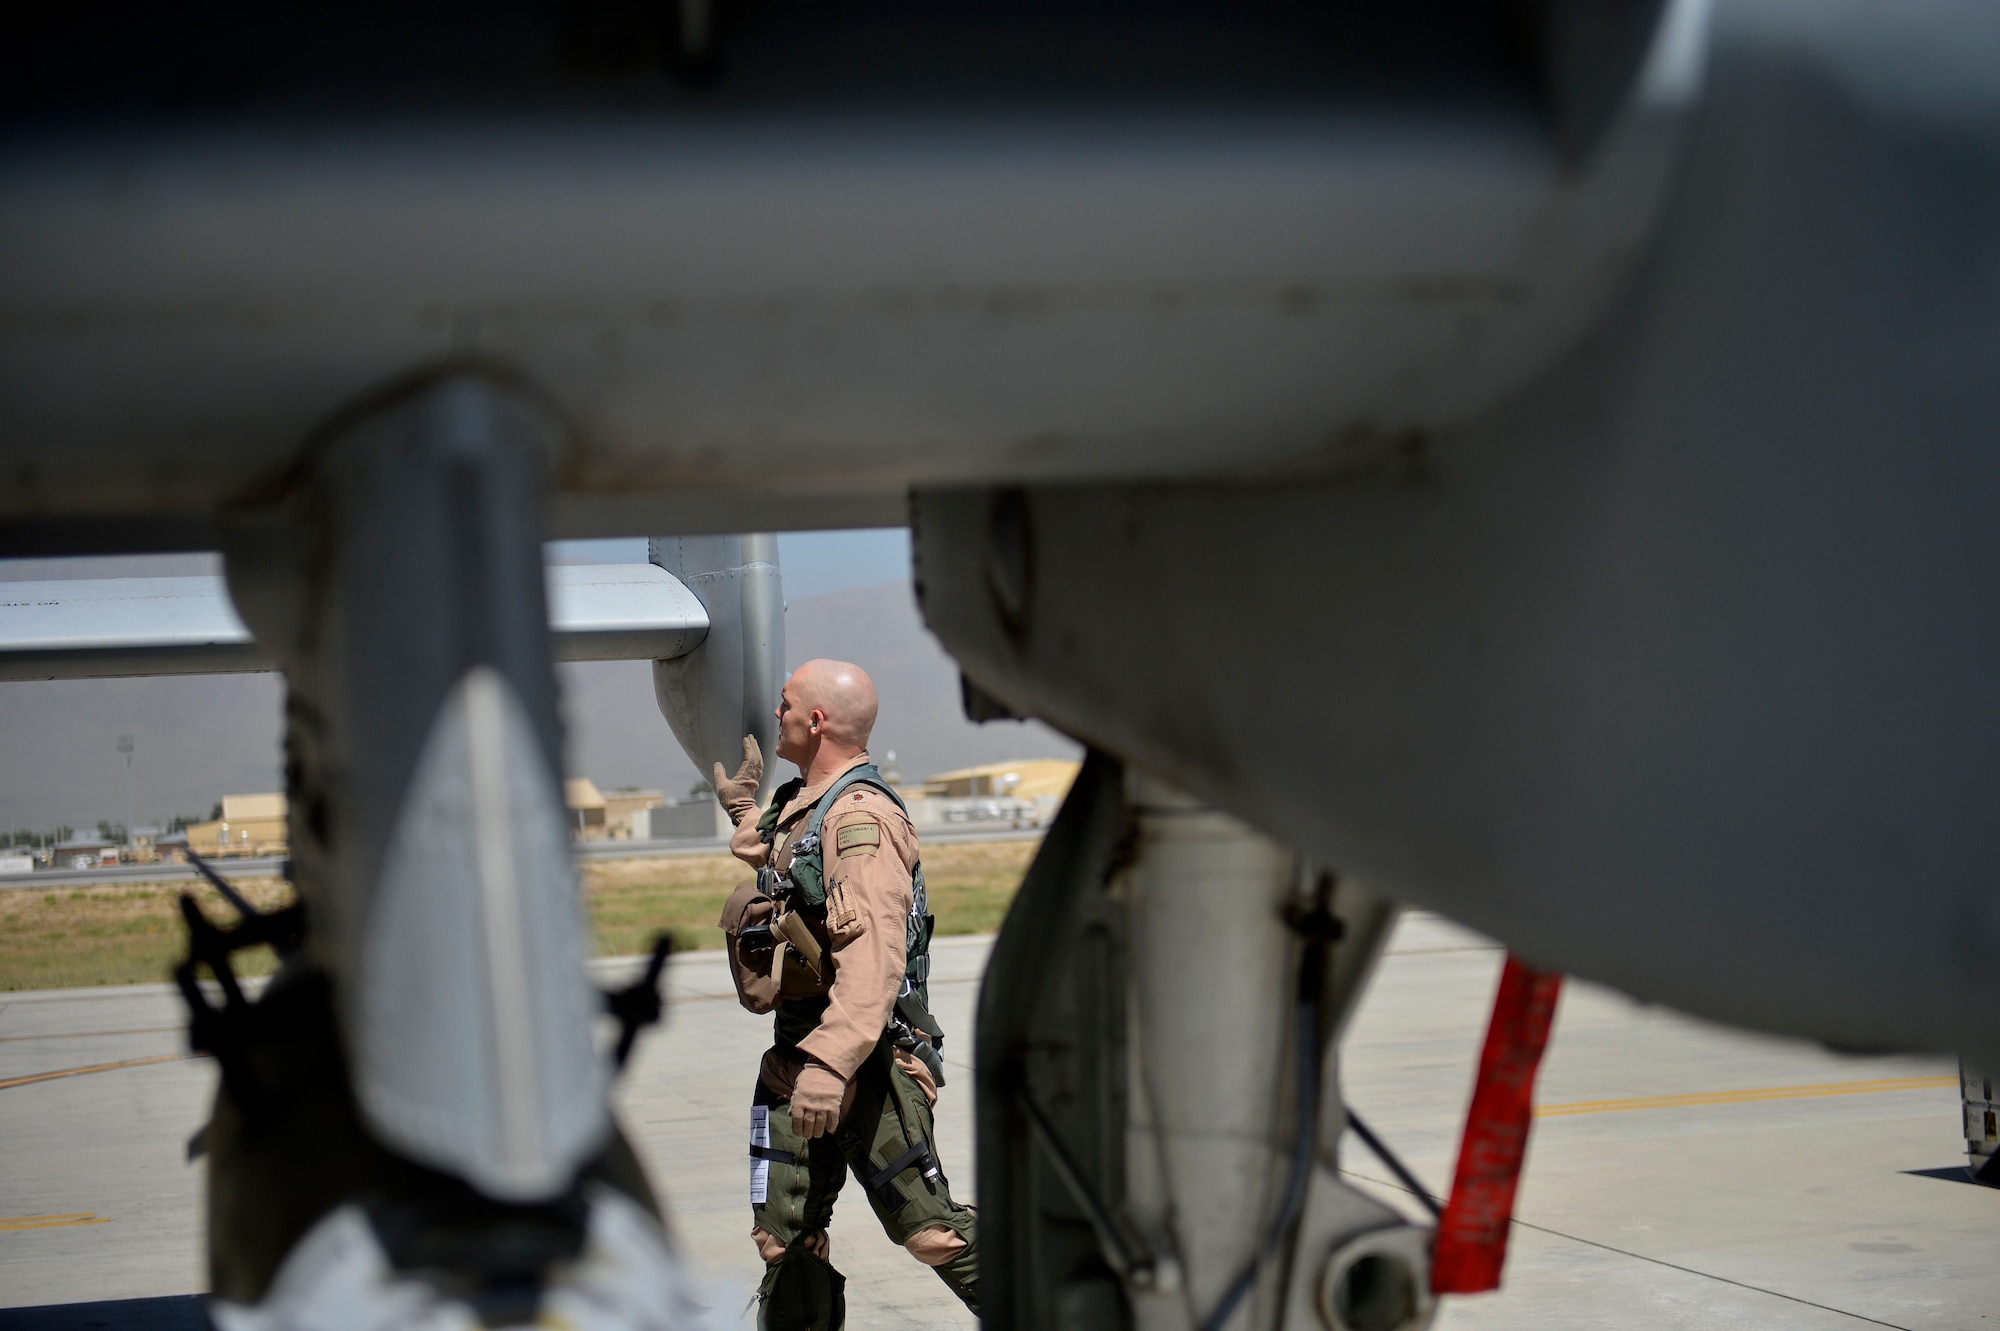 U.S. Air Force Maj. Vincent Sherer, 455th Air Expeditionary Wing pilot, inspects an A-10 Thunderbolt II aircraft at Bagram Airfield, Afghanistan Aug. 5, 2014.  Sherer flies the A-10 to provide overwatch and close air support to ground forces. Sherer is deployed from Davis-Monthan Air Force Base, Ariz. and a native of Portland, Ore. (U.S. Air Force photo by Staff Sgt. Evelyn Chavez/Released)